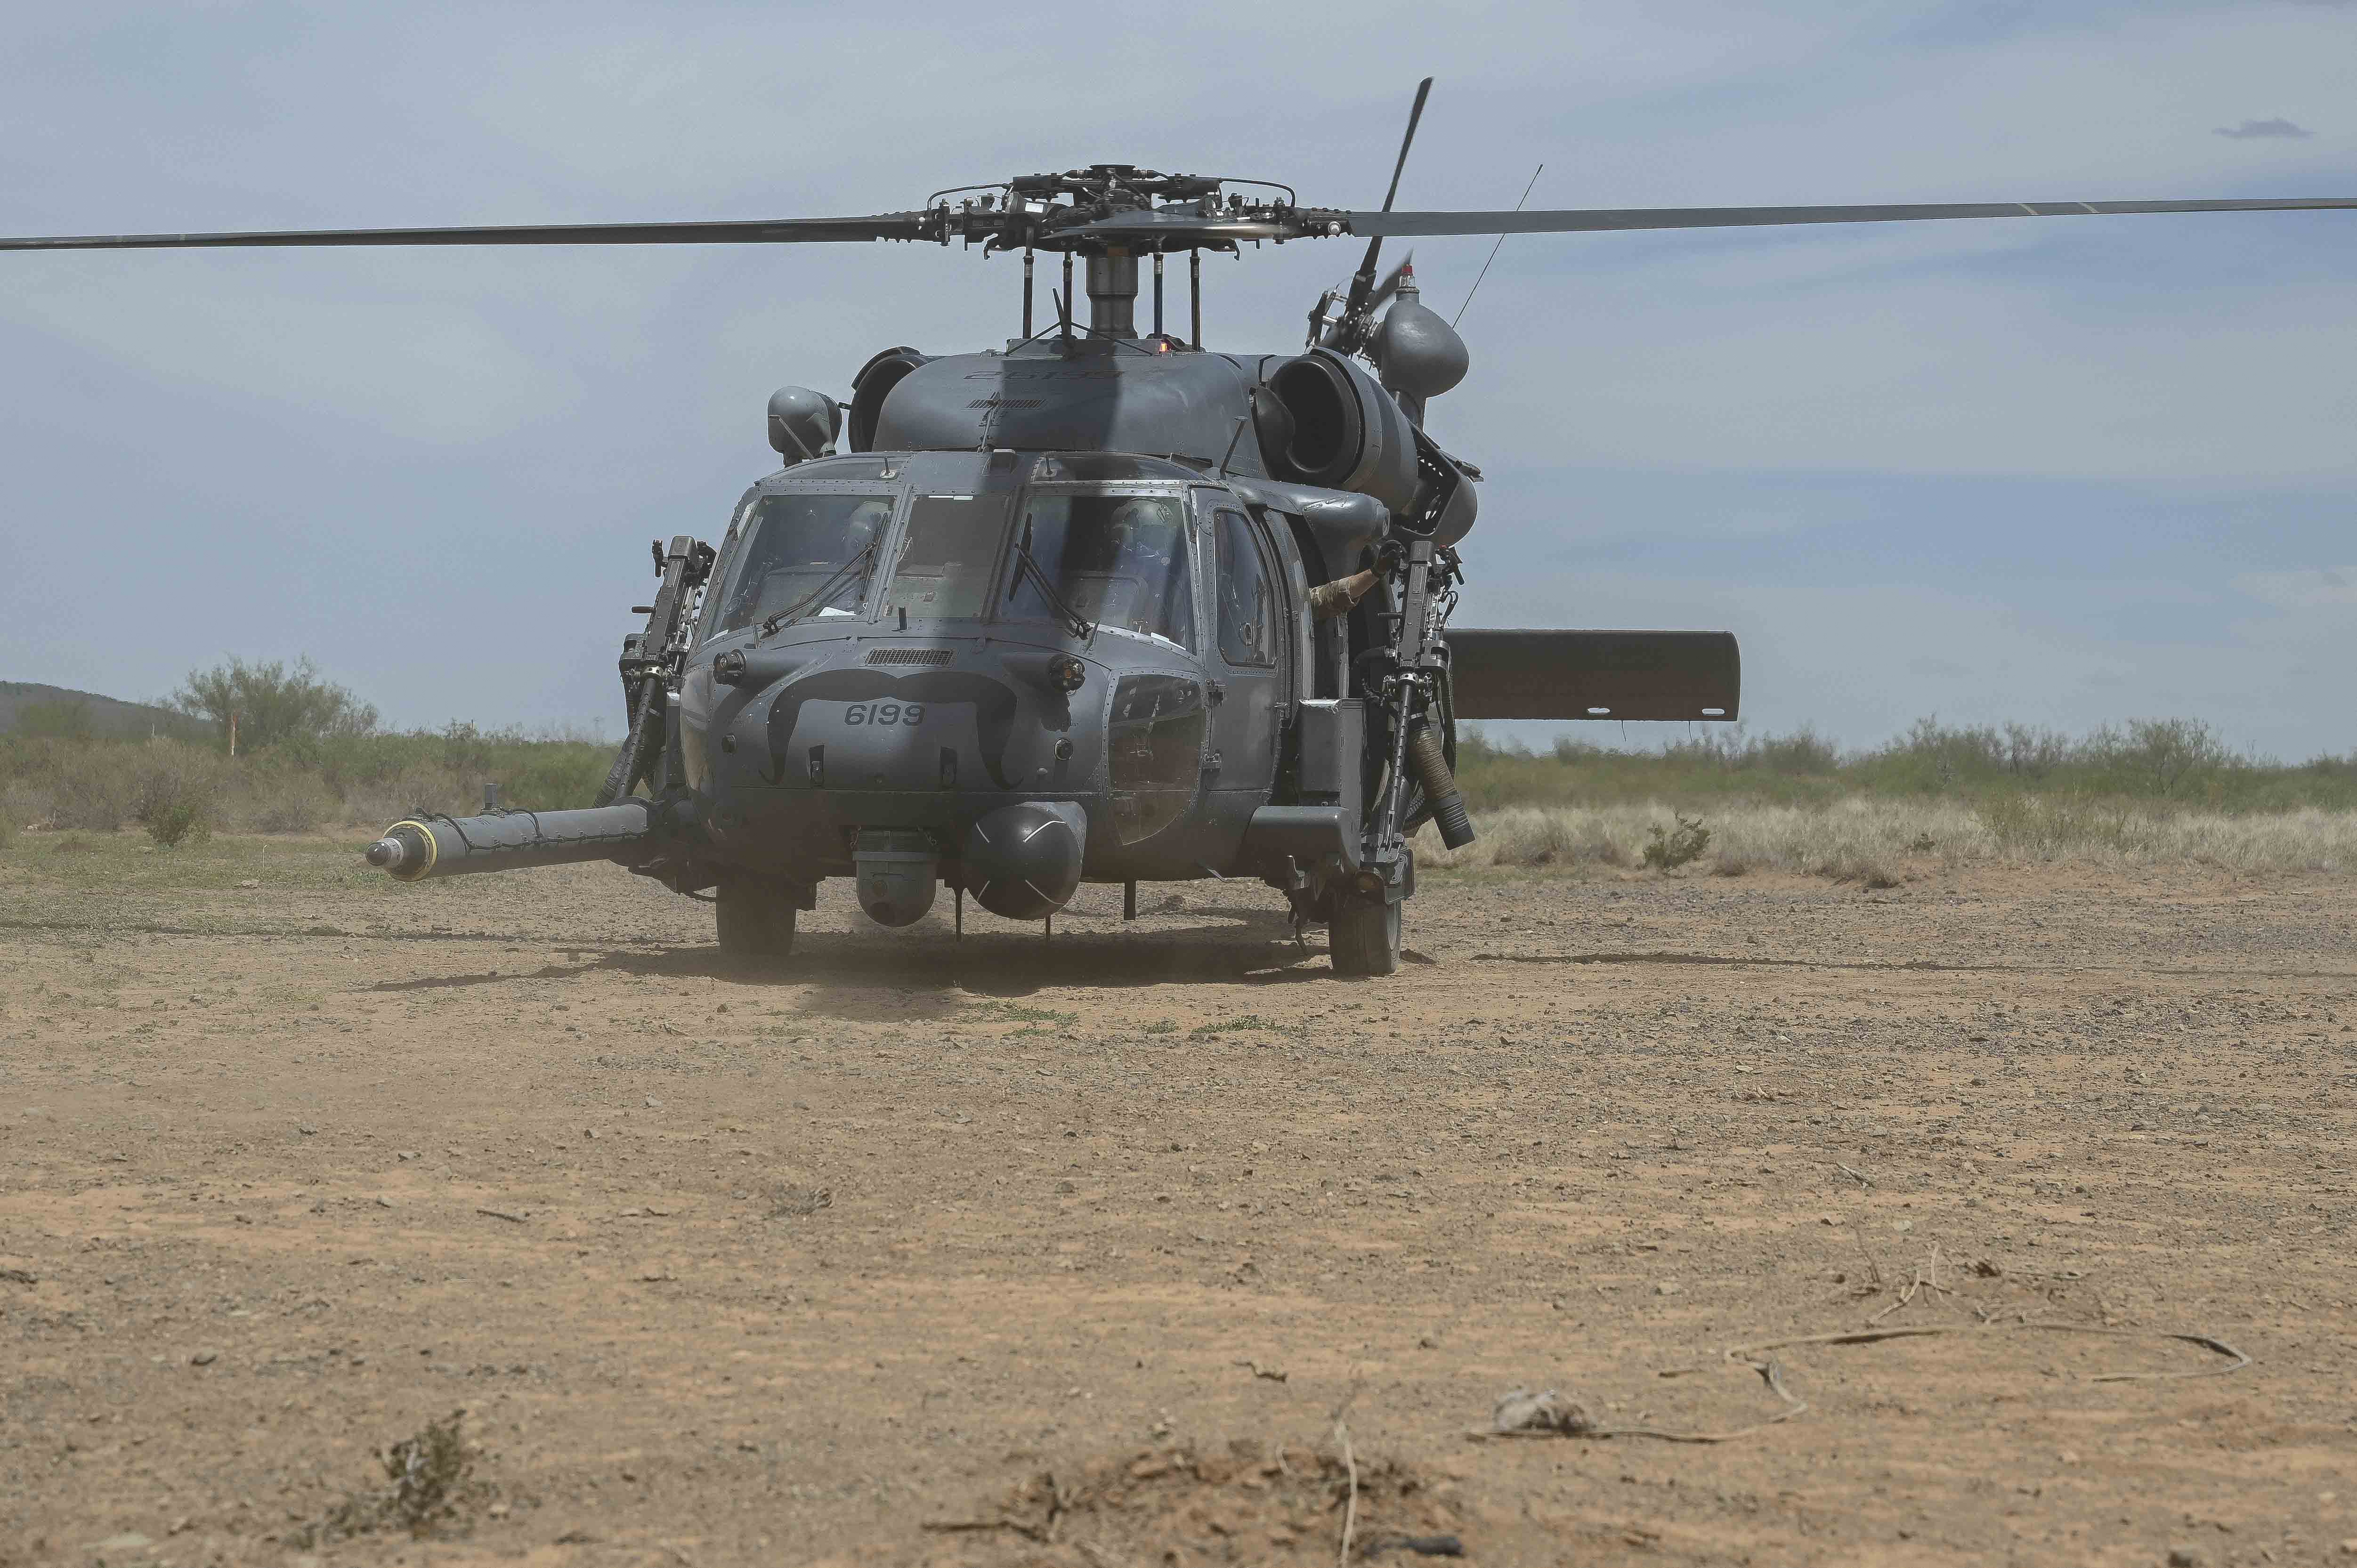 Image shows a helicopter on the ground in the desert.